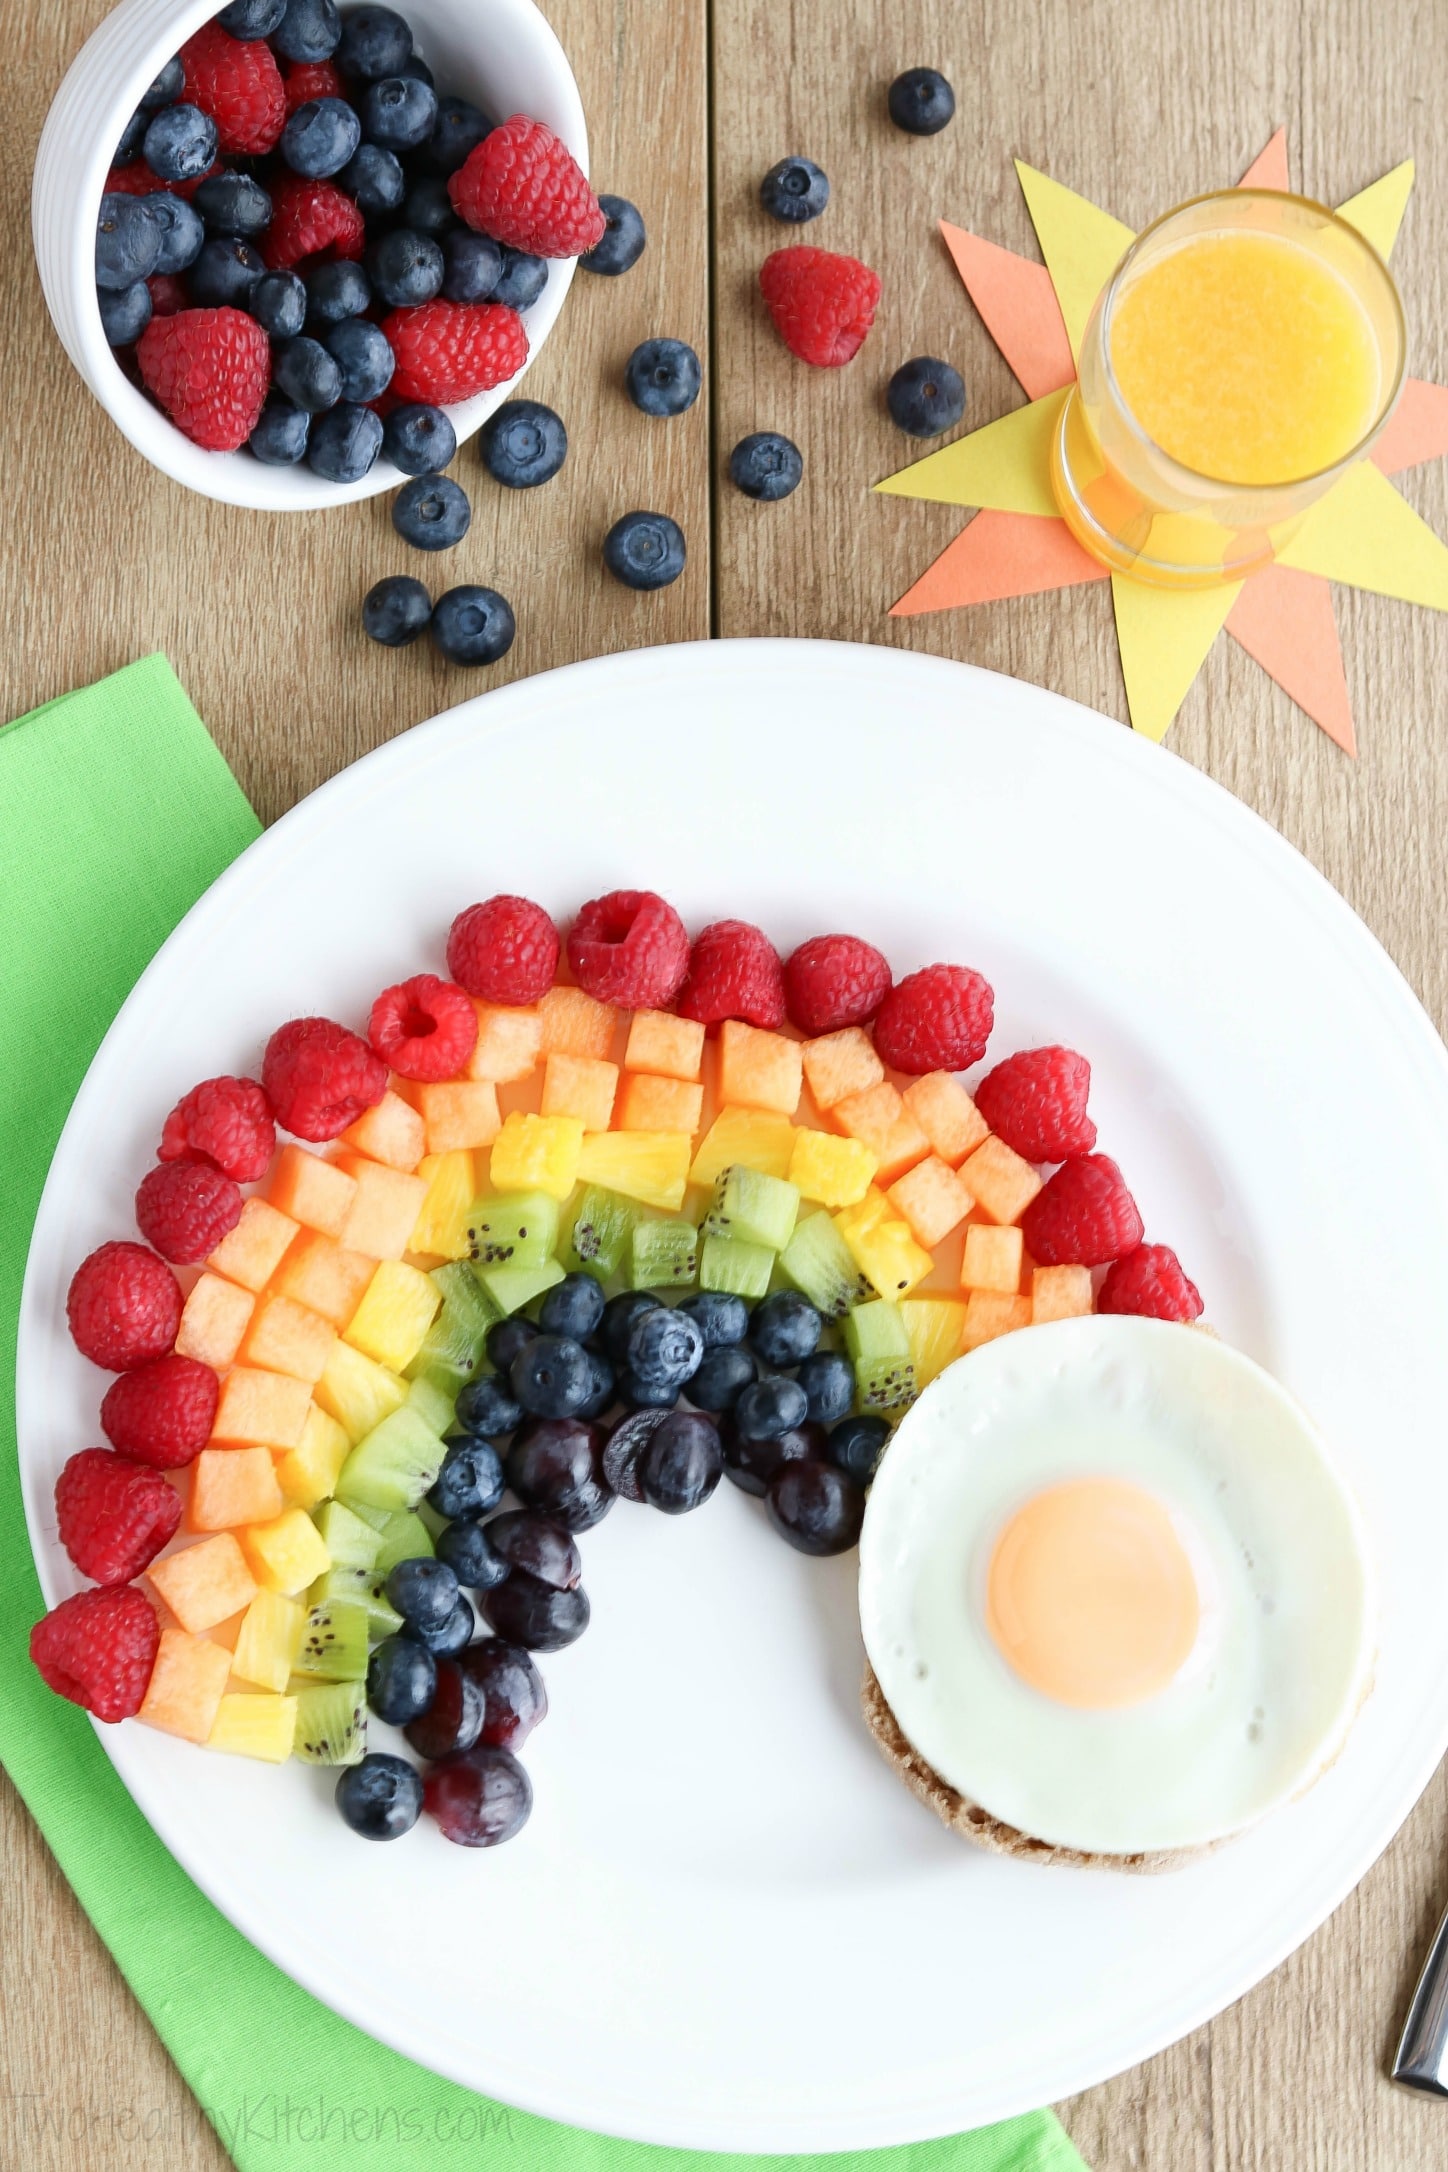 Overhead of fruit rainbow with egg on white plate, with glass of orange juice, green napkin and extra berries.